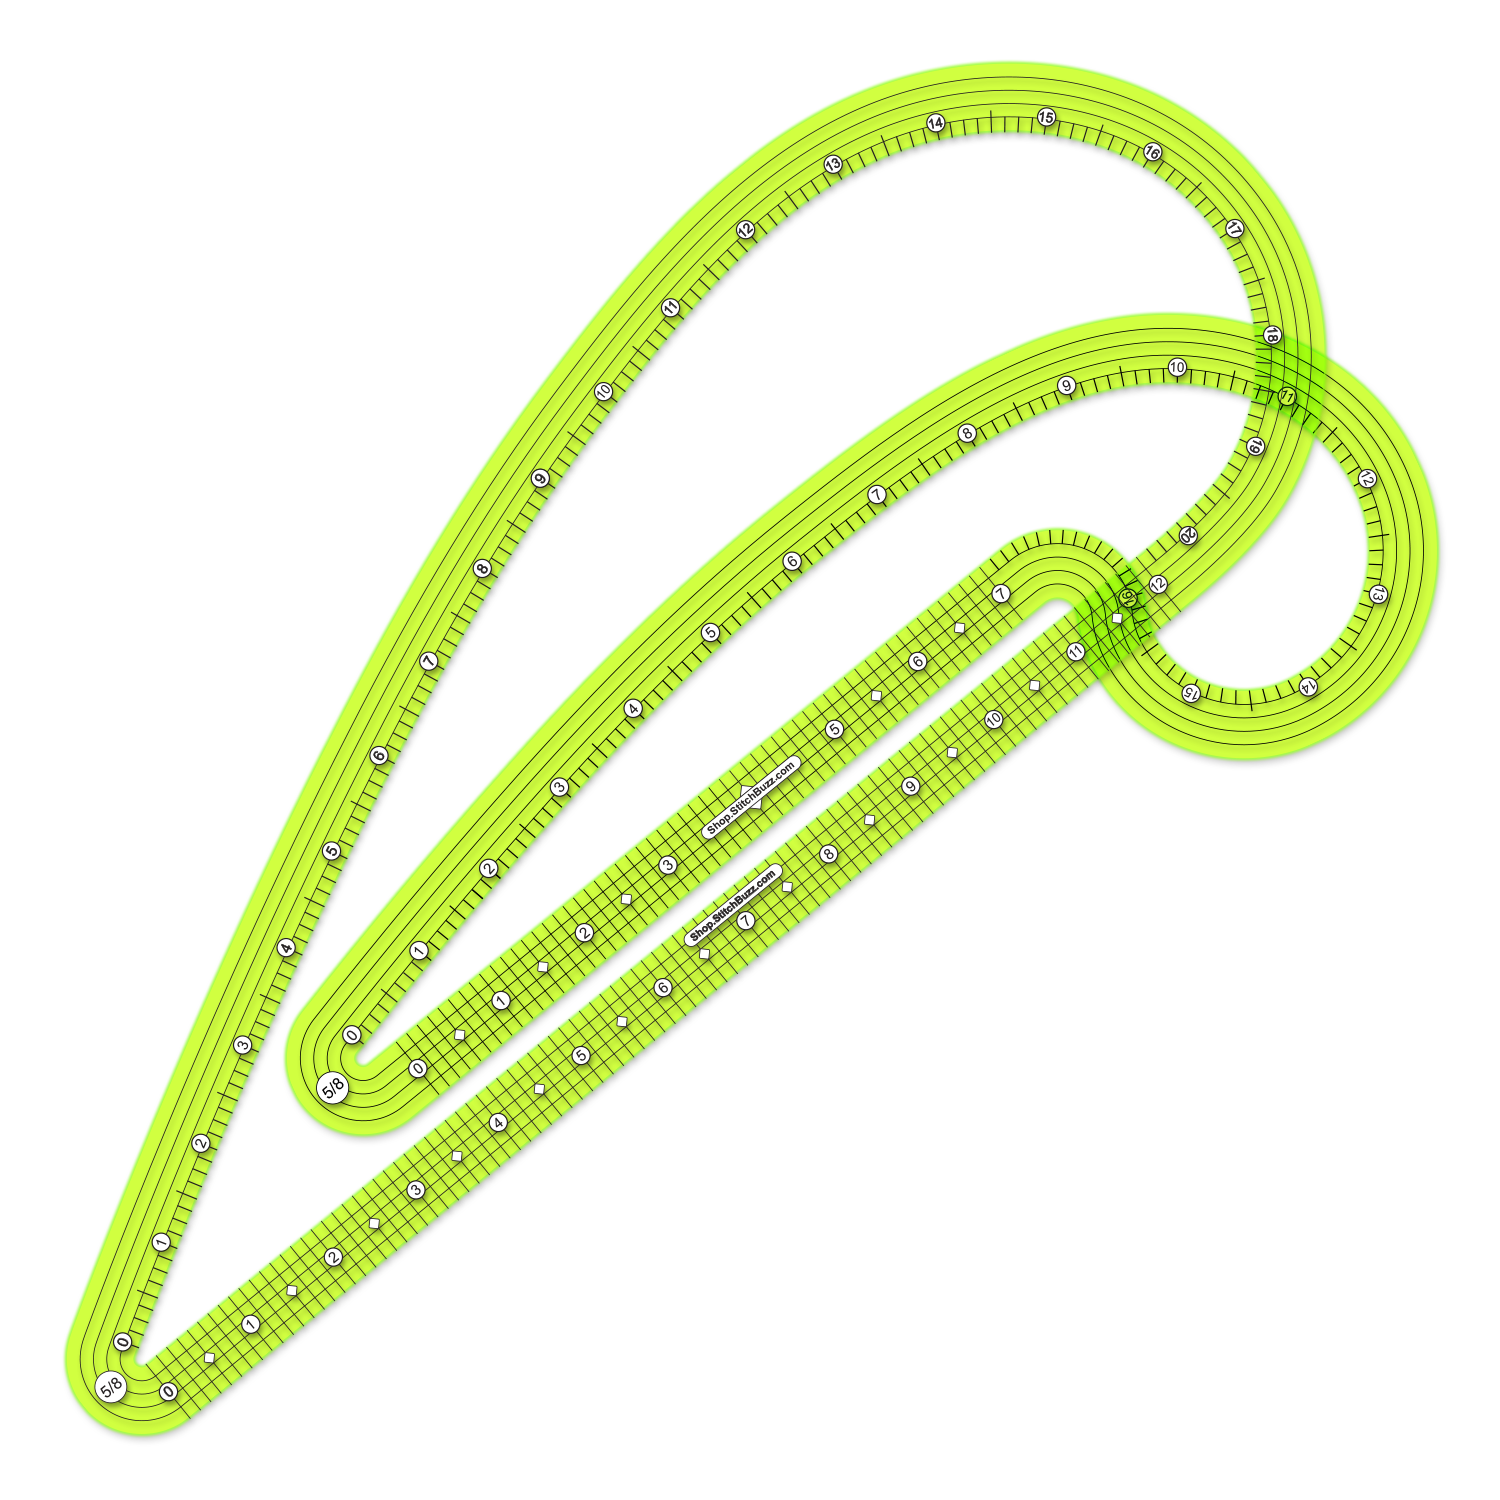 five-eighths inch seam allowance french curve ruler set transparent yellow green plastic